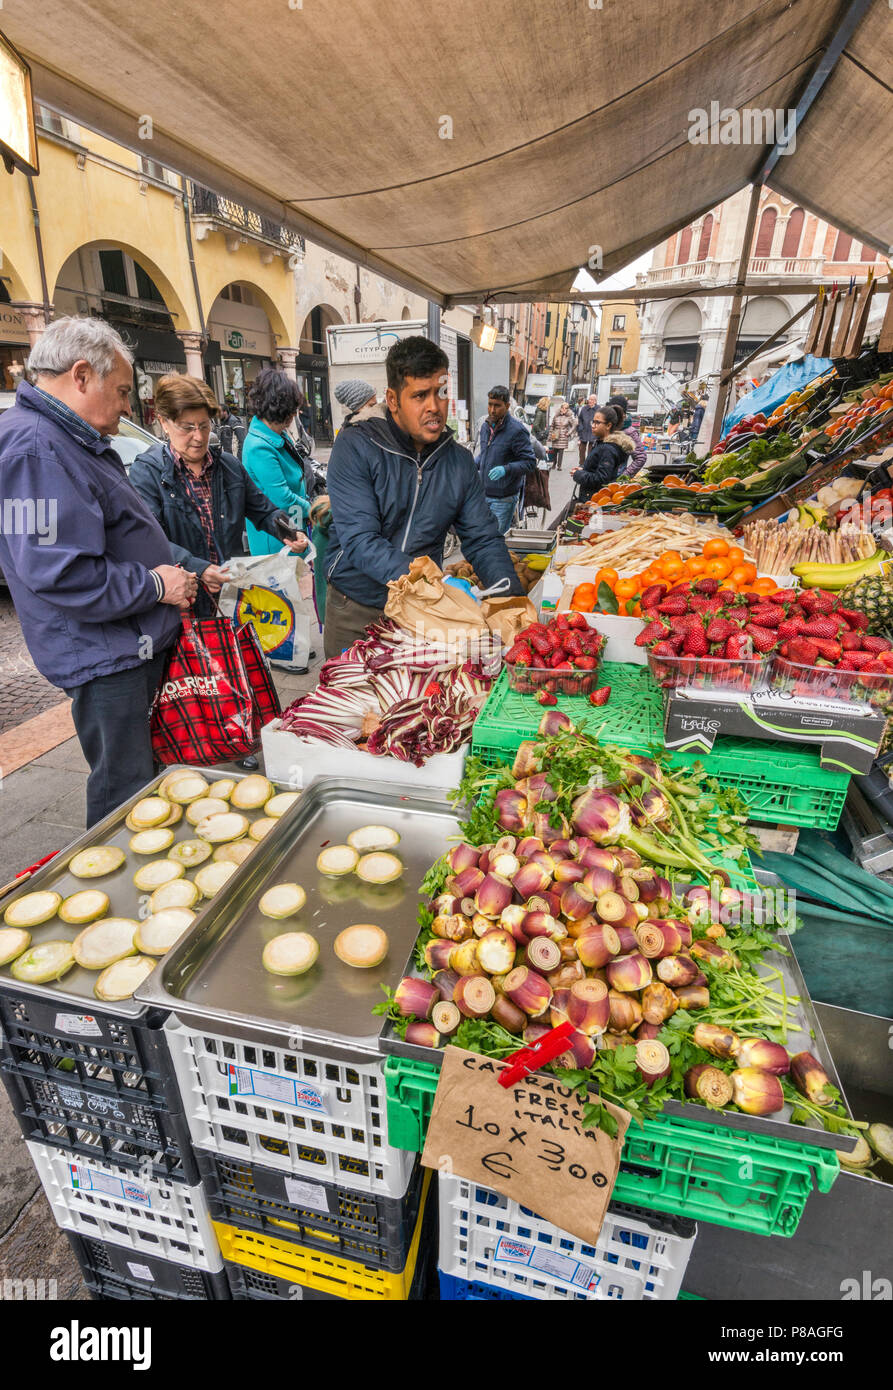 Artichoke hearts and baked slices at greengrocer stall, Piazza delle Erbe in Padua, Veneto, Italy Stock Photo